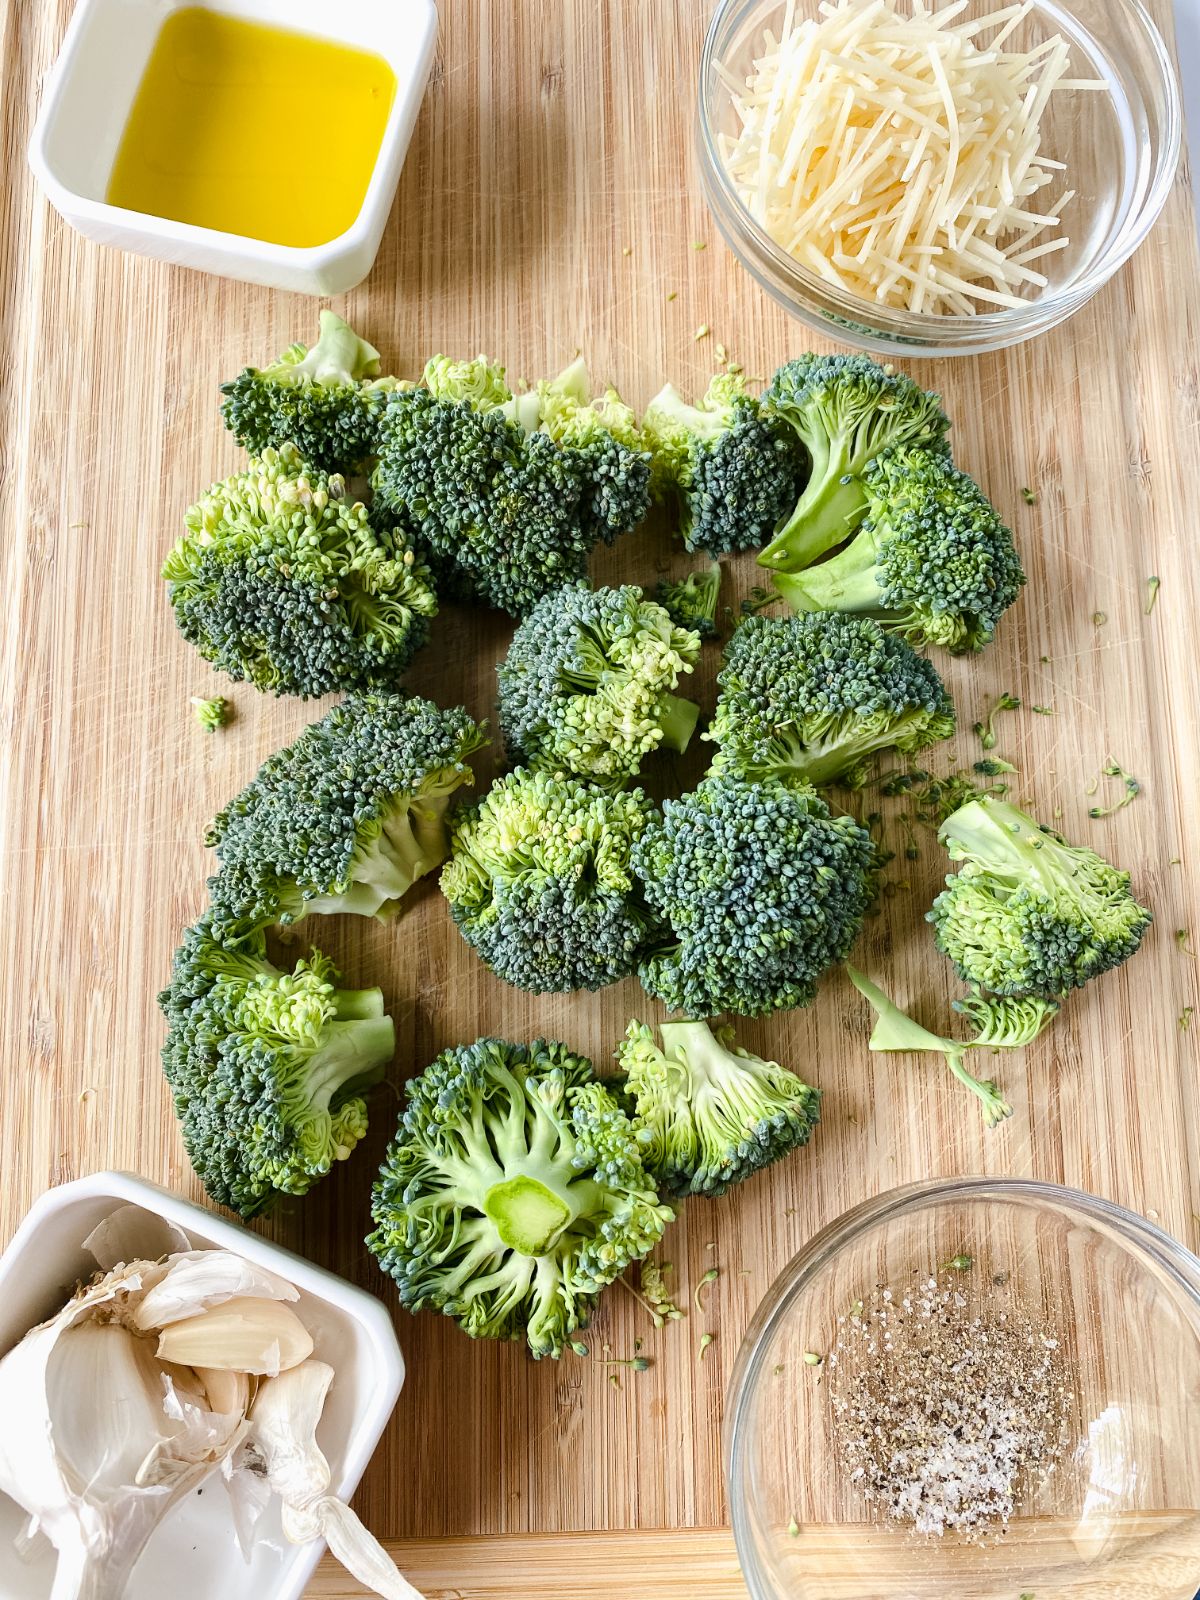 broccoli on cutting board with bowls of spices and cheese on side